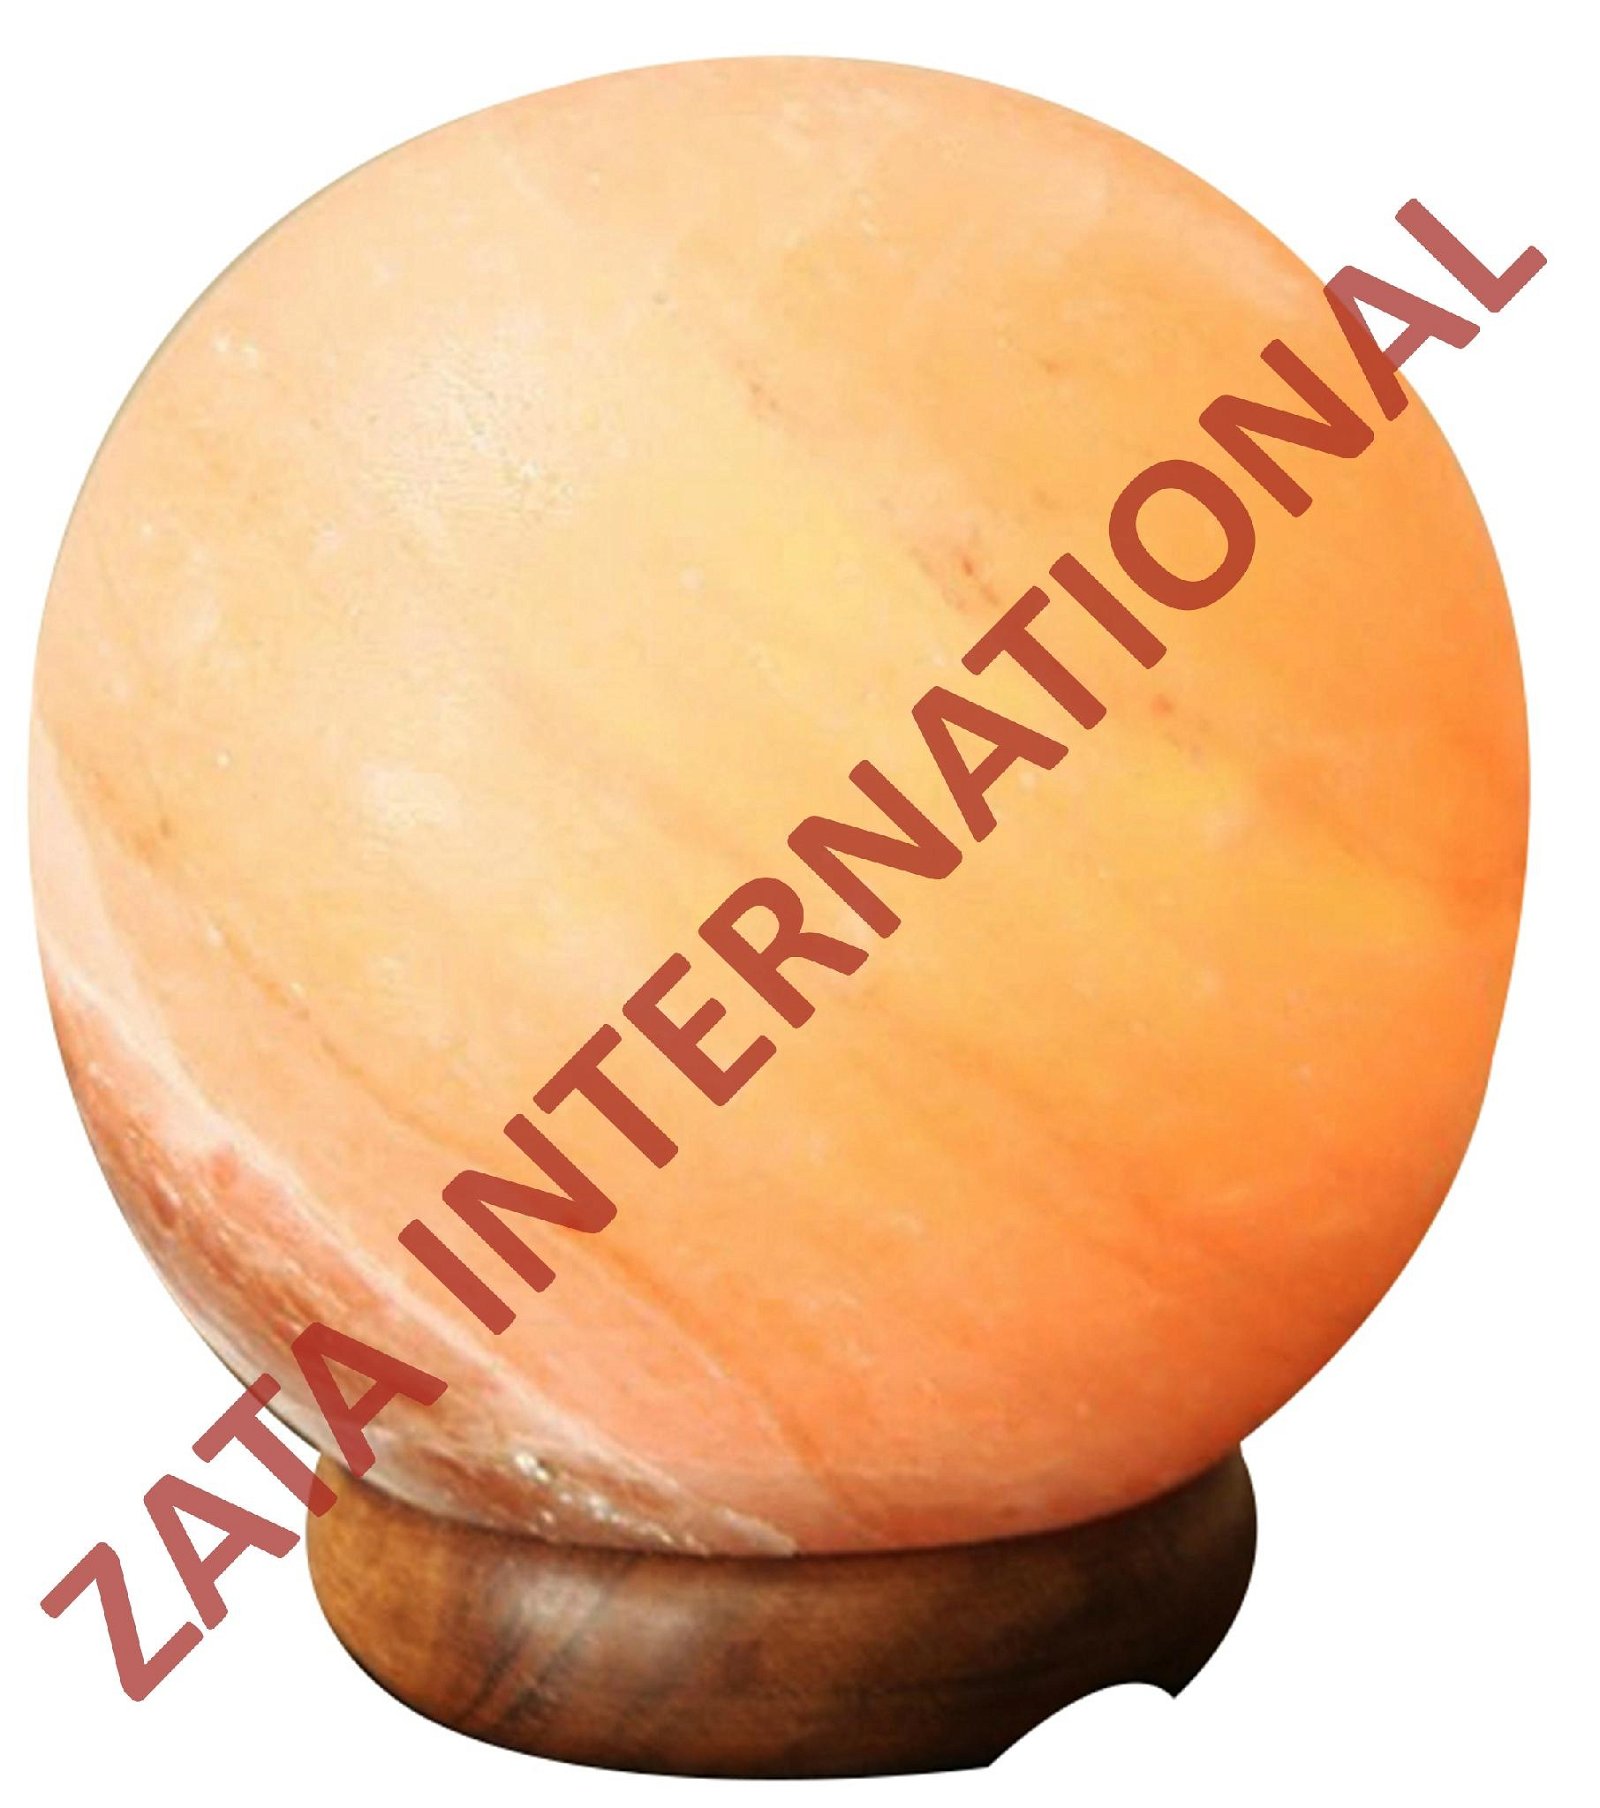 Himalayan Globe Salt Lamps 6 x 6 x 6 Inches UL Approved 6 Feets Cord Bulb w Base 1